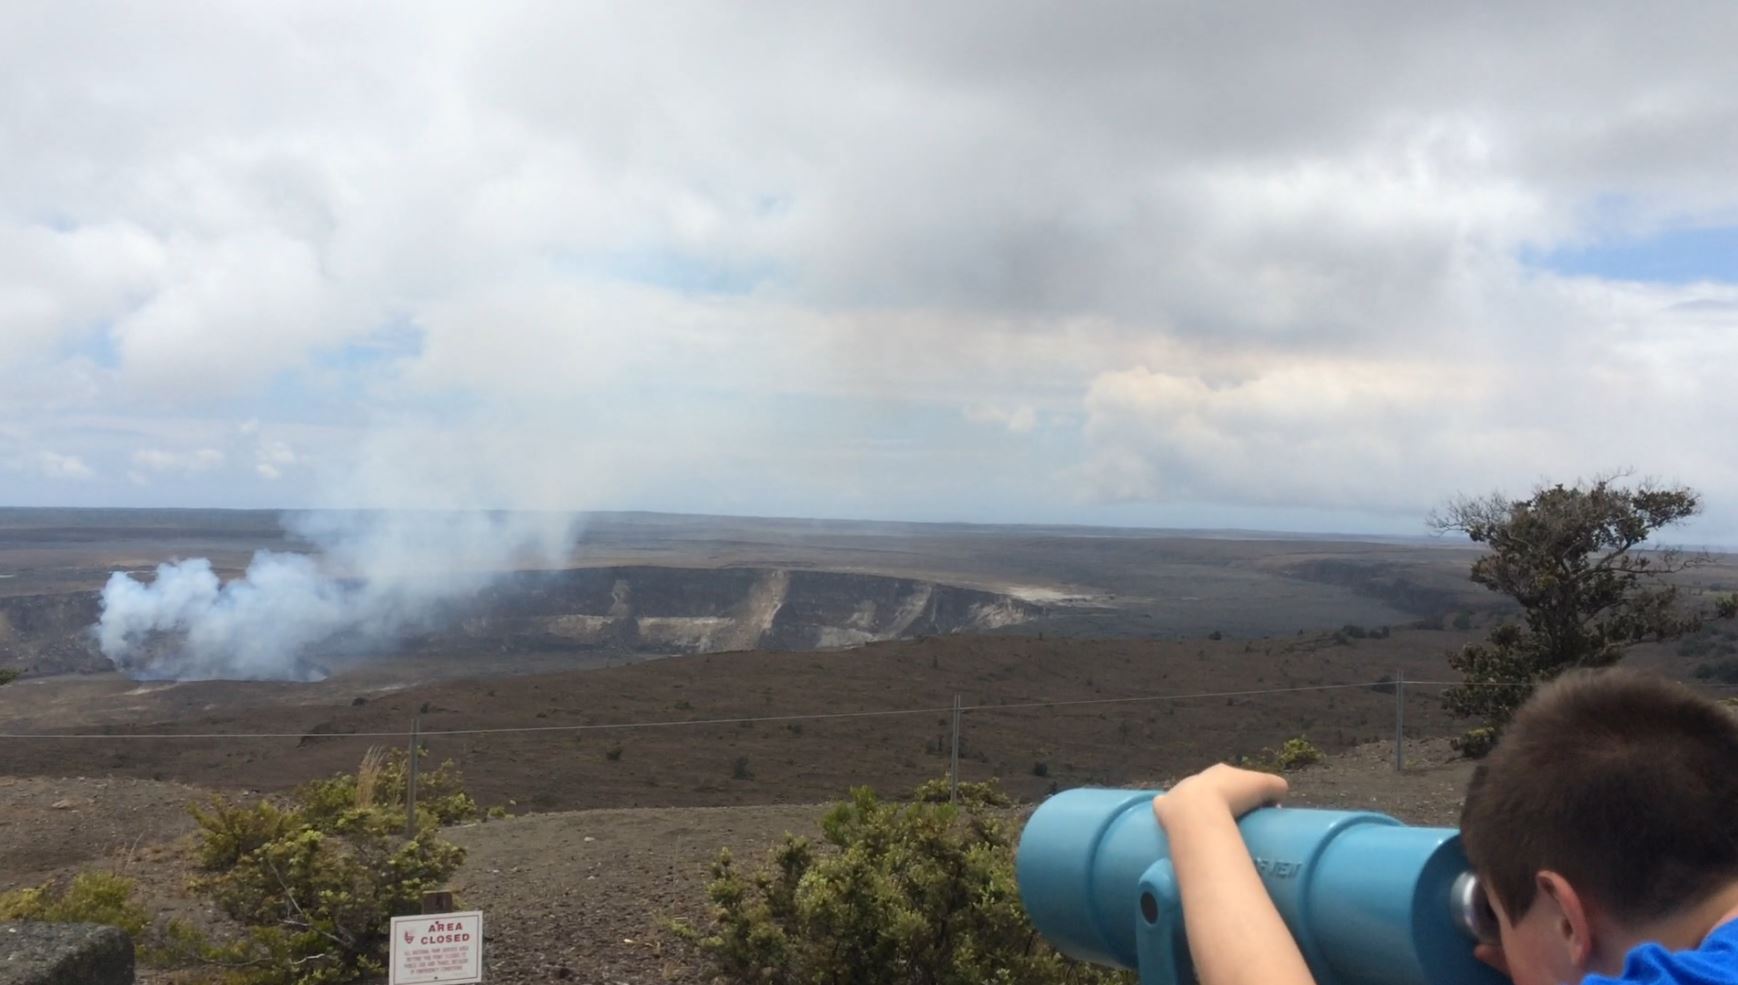 Price Checking Out the Volcano